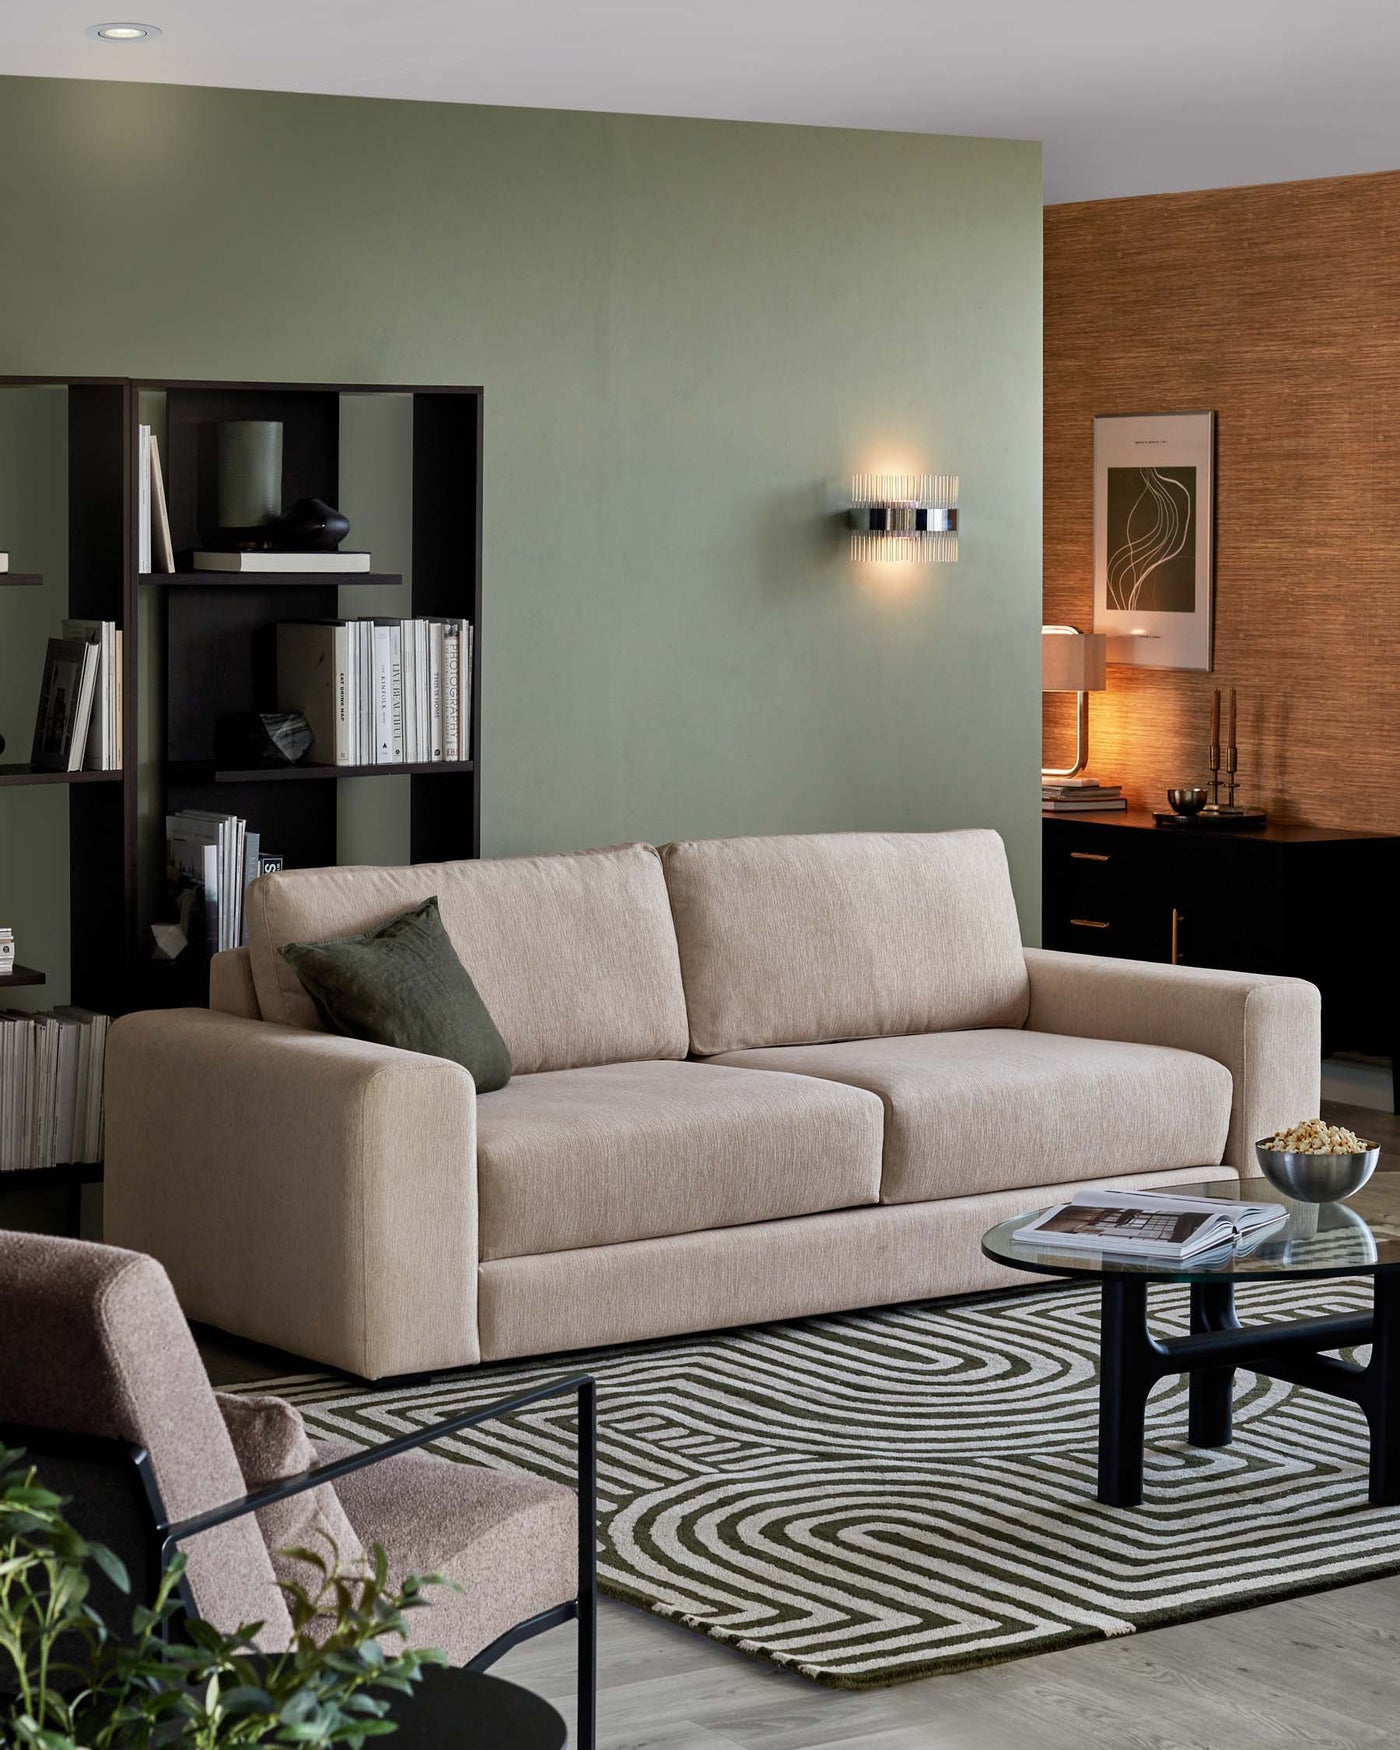 Modern living room featuring a neutral-toned three-seater fabric sofa with plush cushions, a black metal-frame coffee table with a round glass top, and a coordinating geometric-patterned area rug in shades of green and beige. A dark-toned bookshelf with various decorative items and books accents the space.